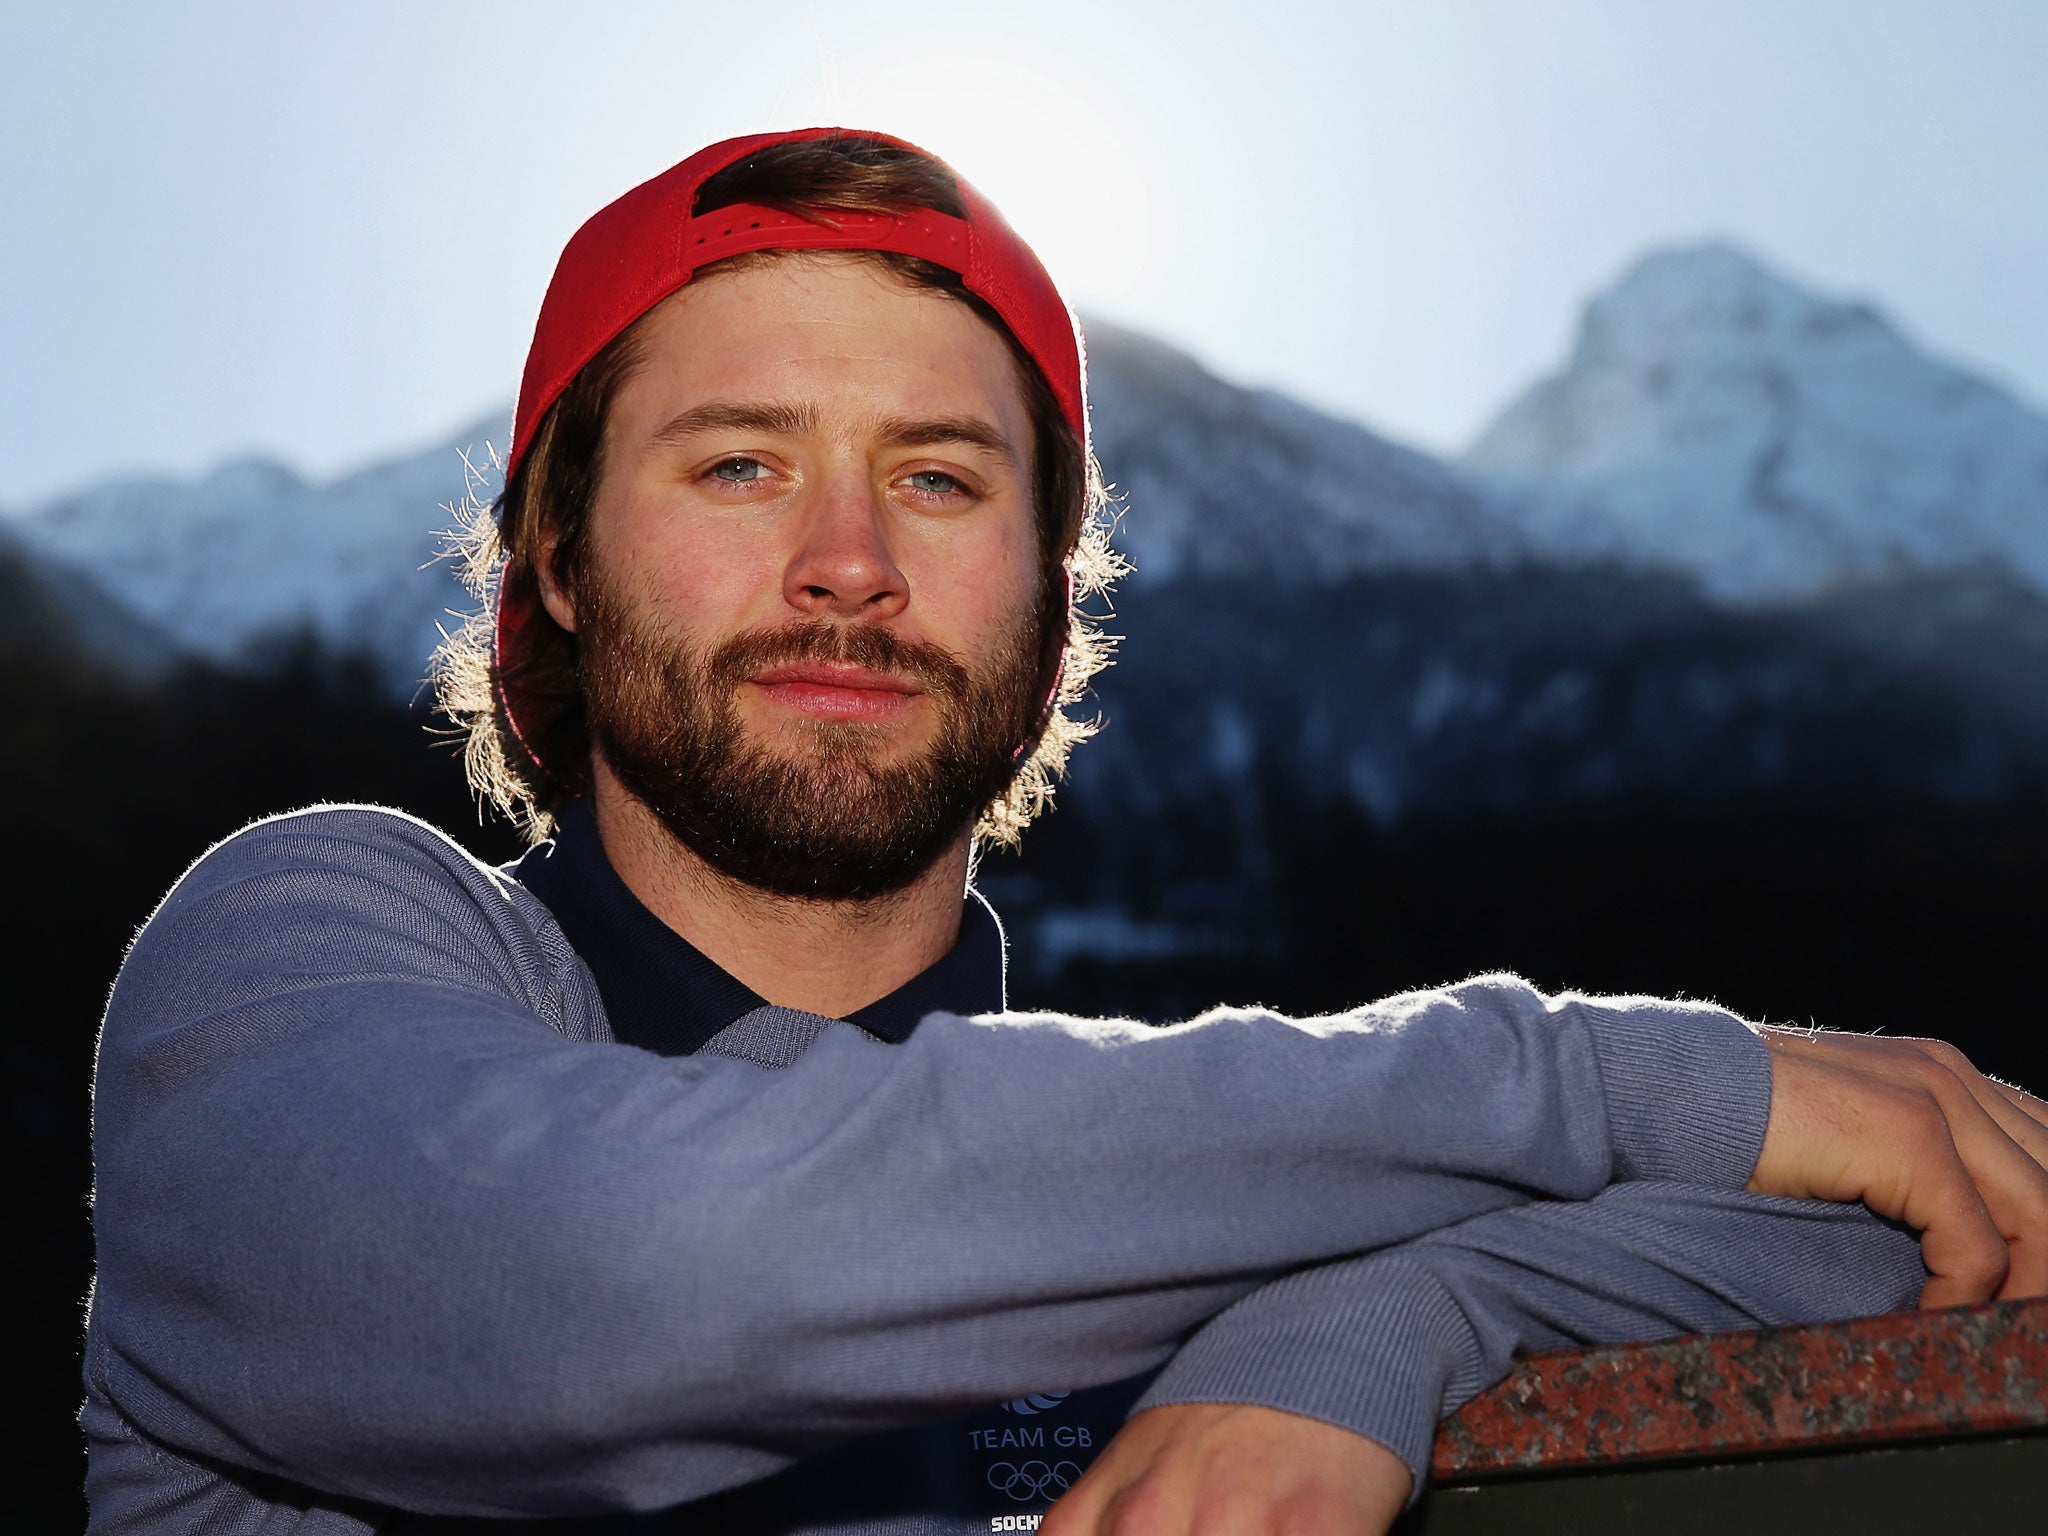 Billy Morgan will be the first person to compete at the Sochi Winter Olympics